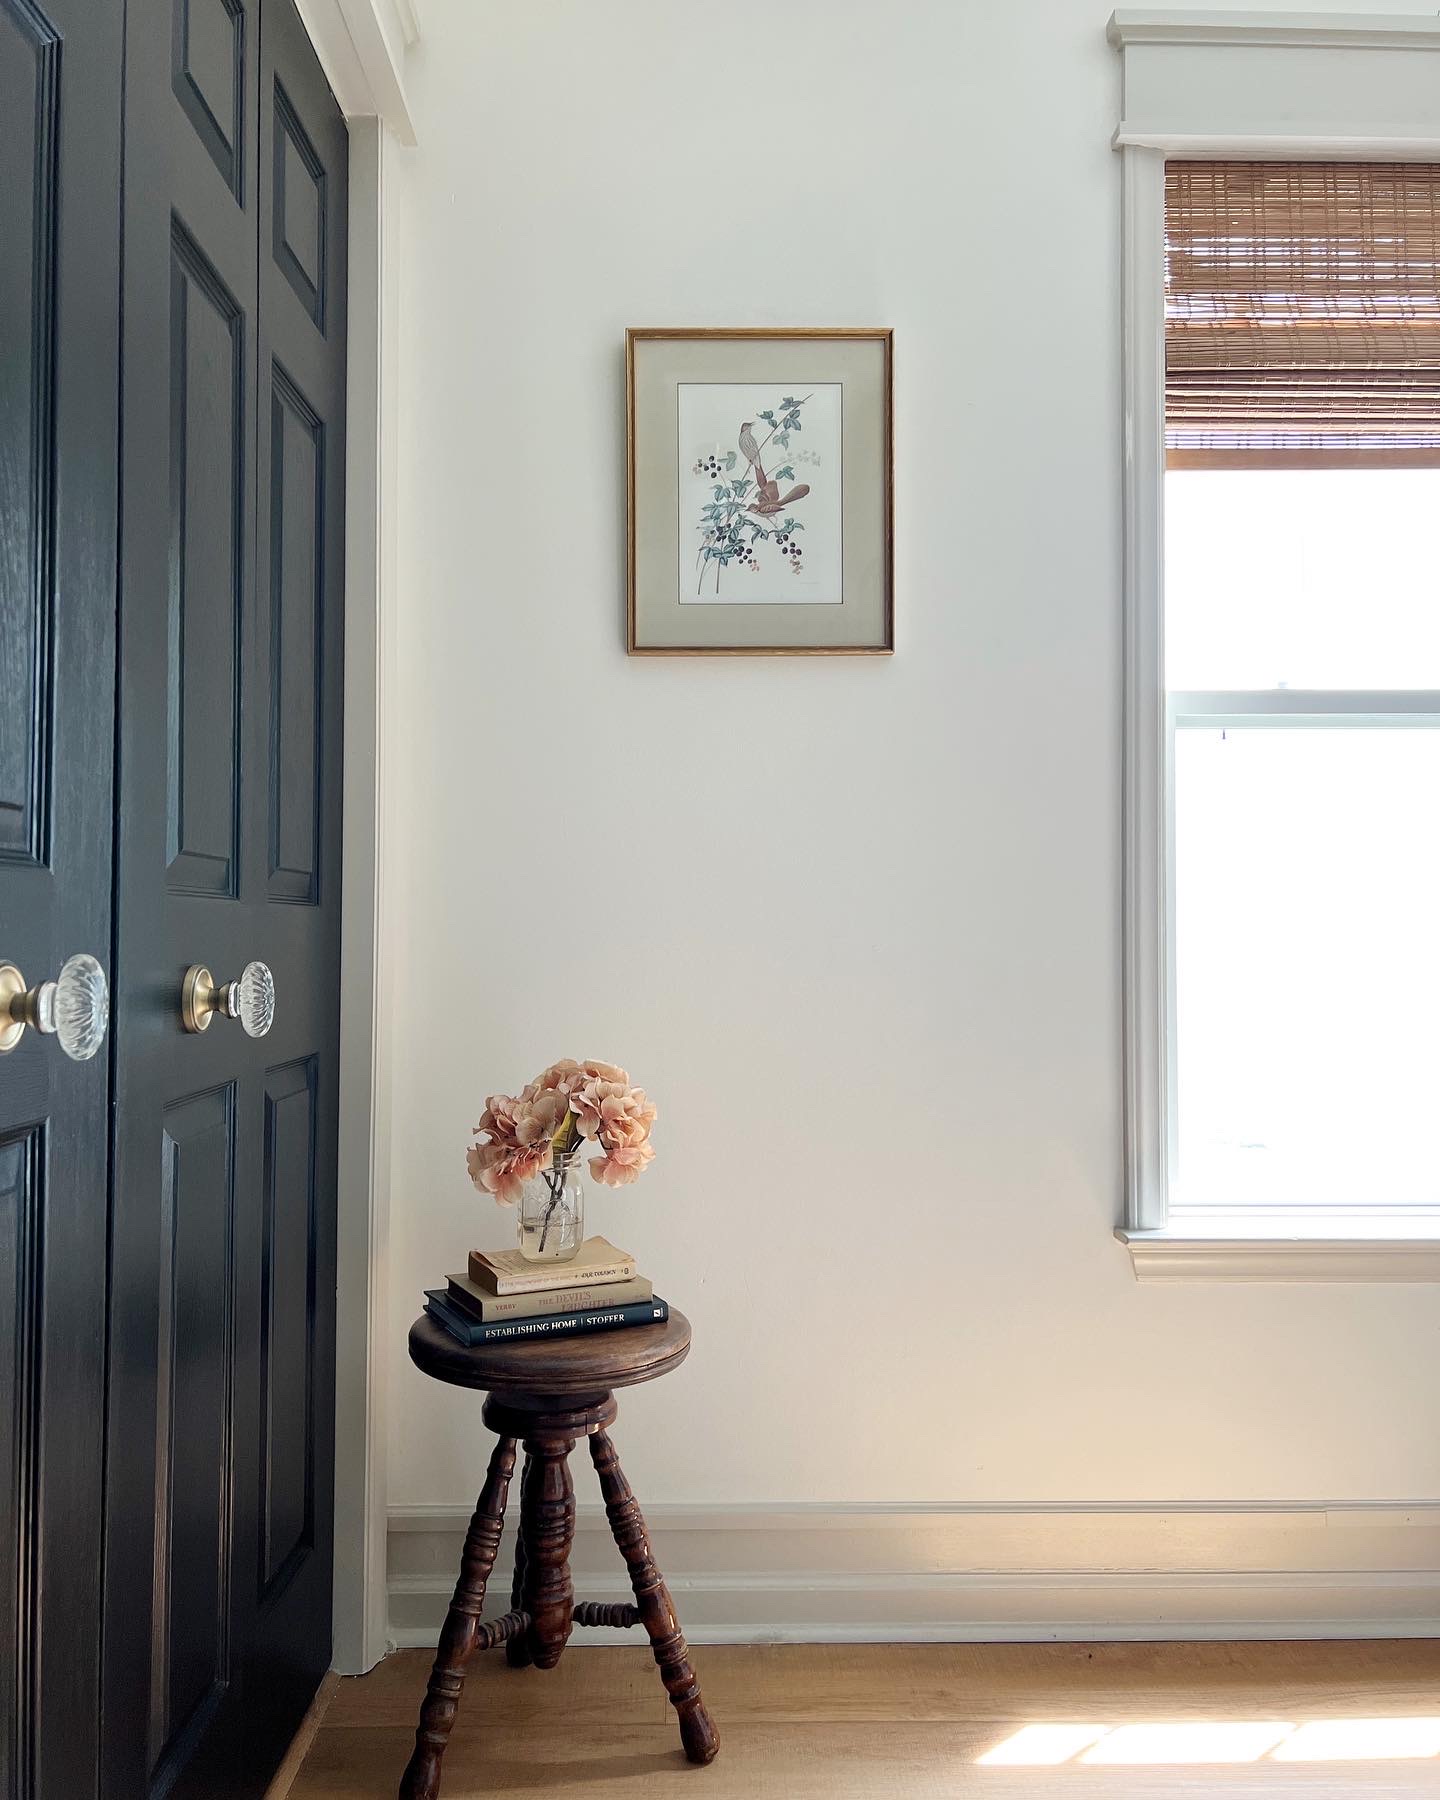 contrasting taupe trim in hallway. thrifted art hanging on th wall above wooden vintage piano stool with hydrangeas Black painted bi-fold doors with nostalgic warehouse knobs - gold rosette with crystal oval knobs. Craftsman style window trim covered in bamboo shade